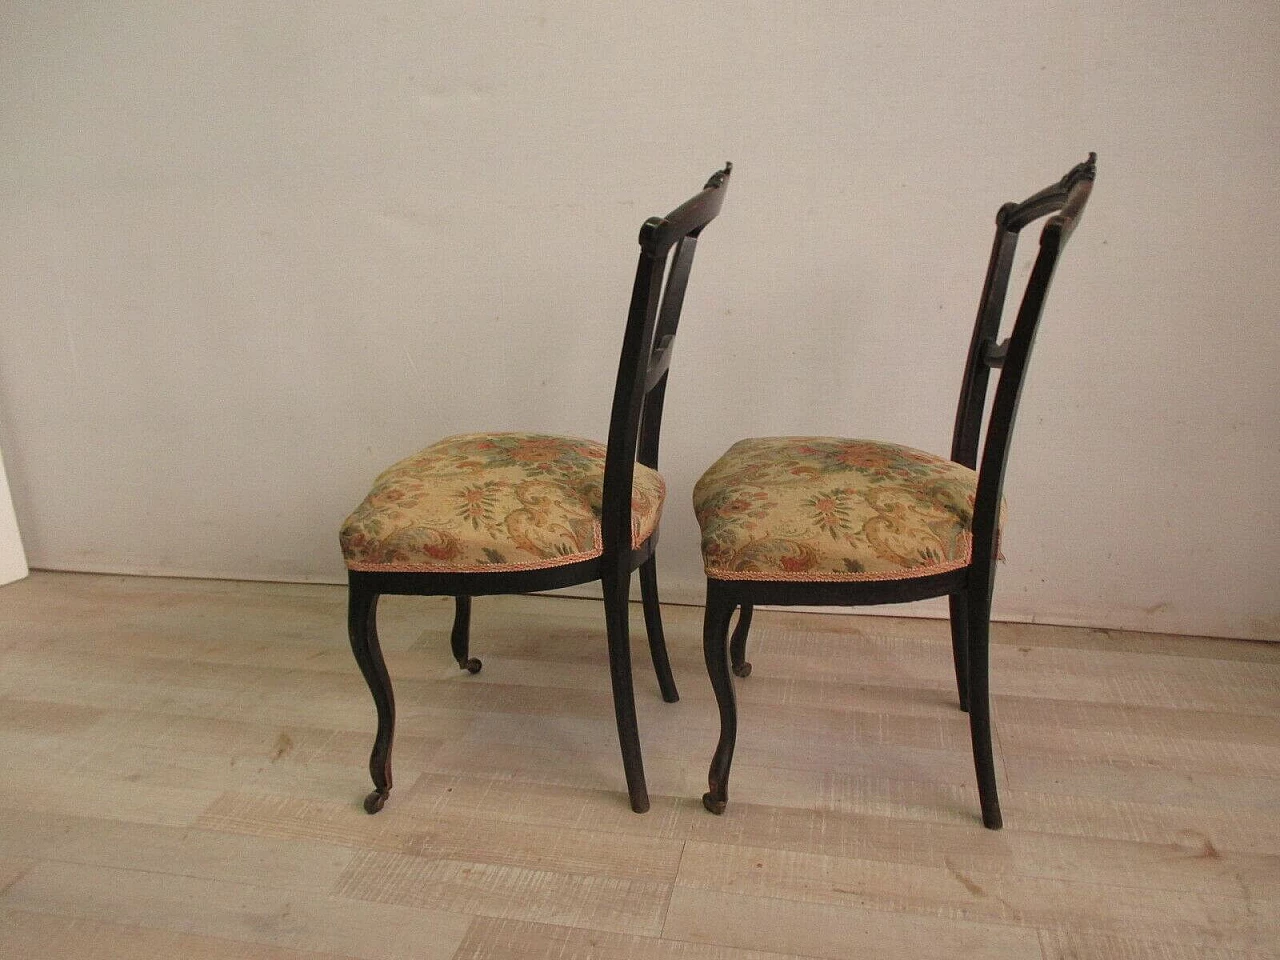 Pair of Umbertine chairs with casters in ebonised solid walnut and Gobelin fabric, 19th century 9